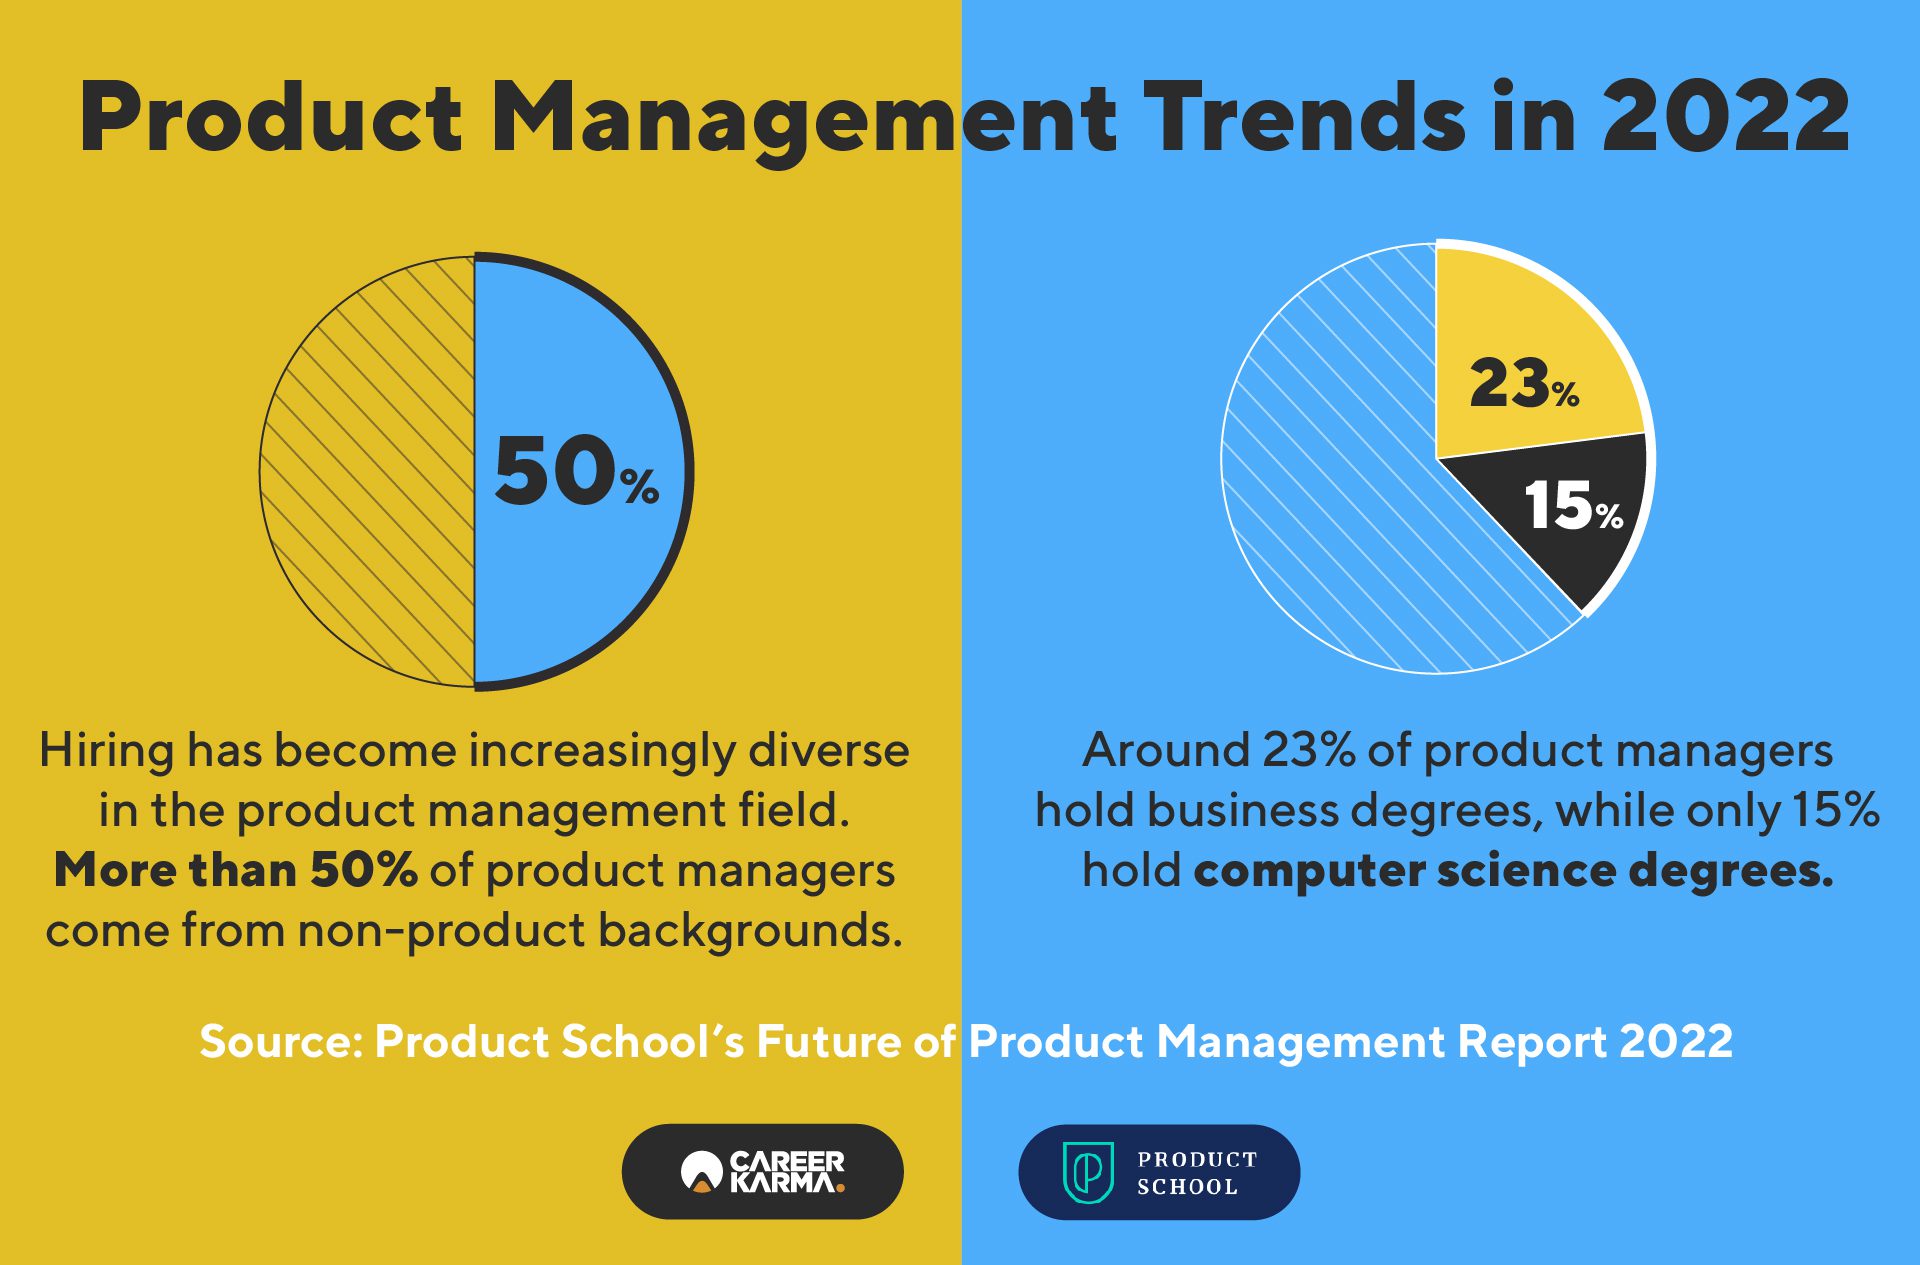 An infographic showing product management trends in 2022